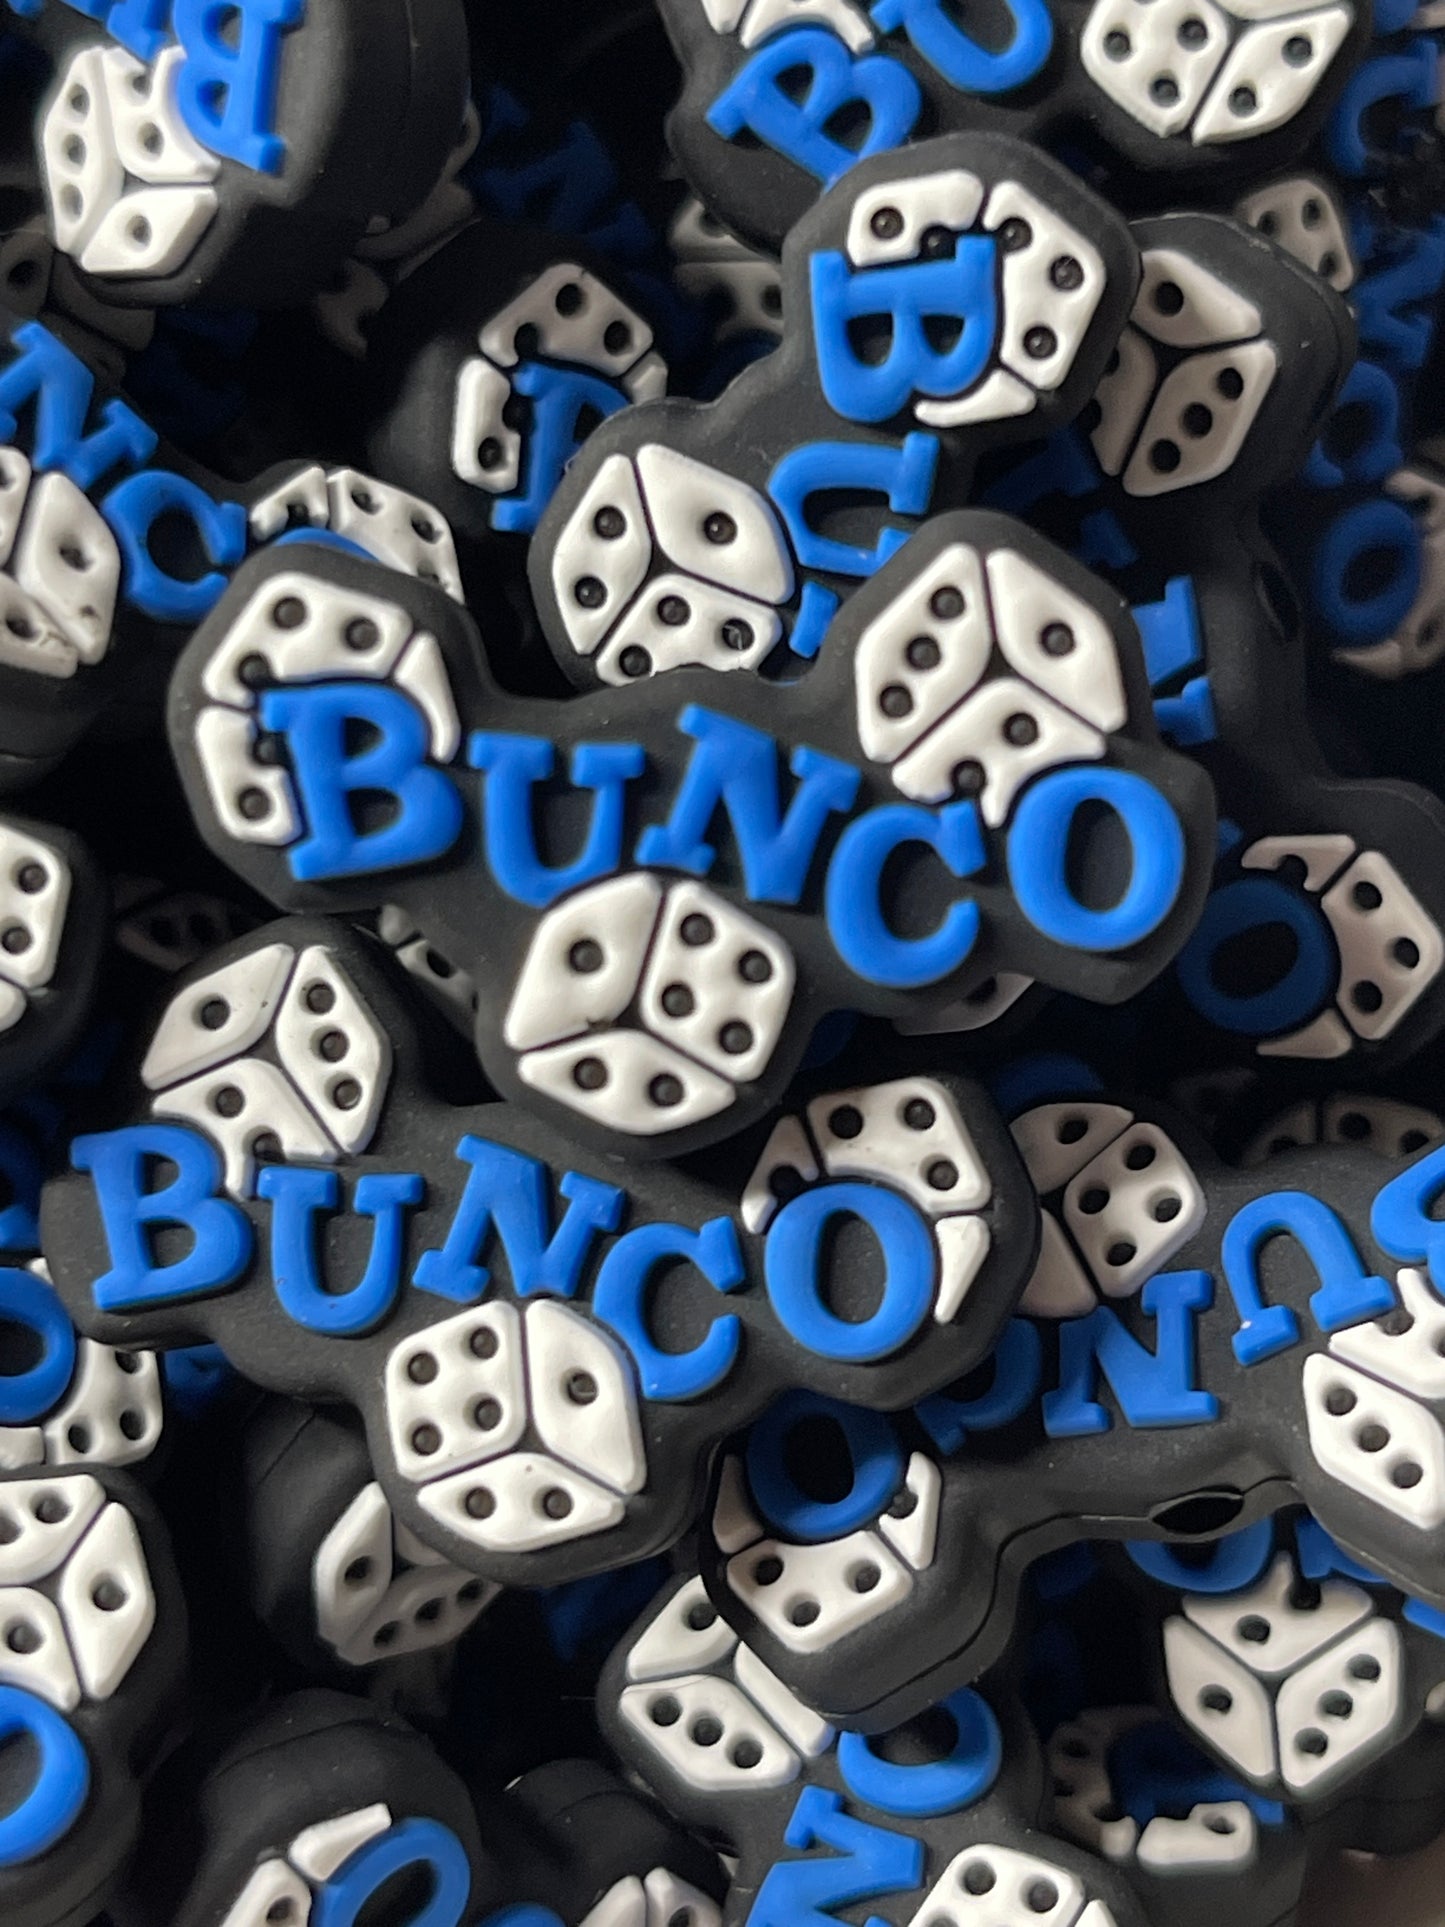 Bunco -Exclusive Collab with TATNCS, Jitistouch & Tumbalista